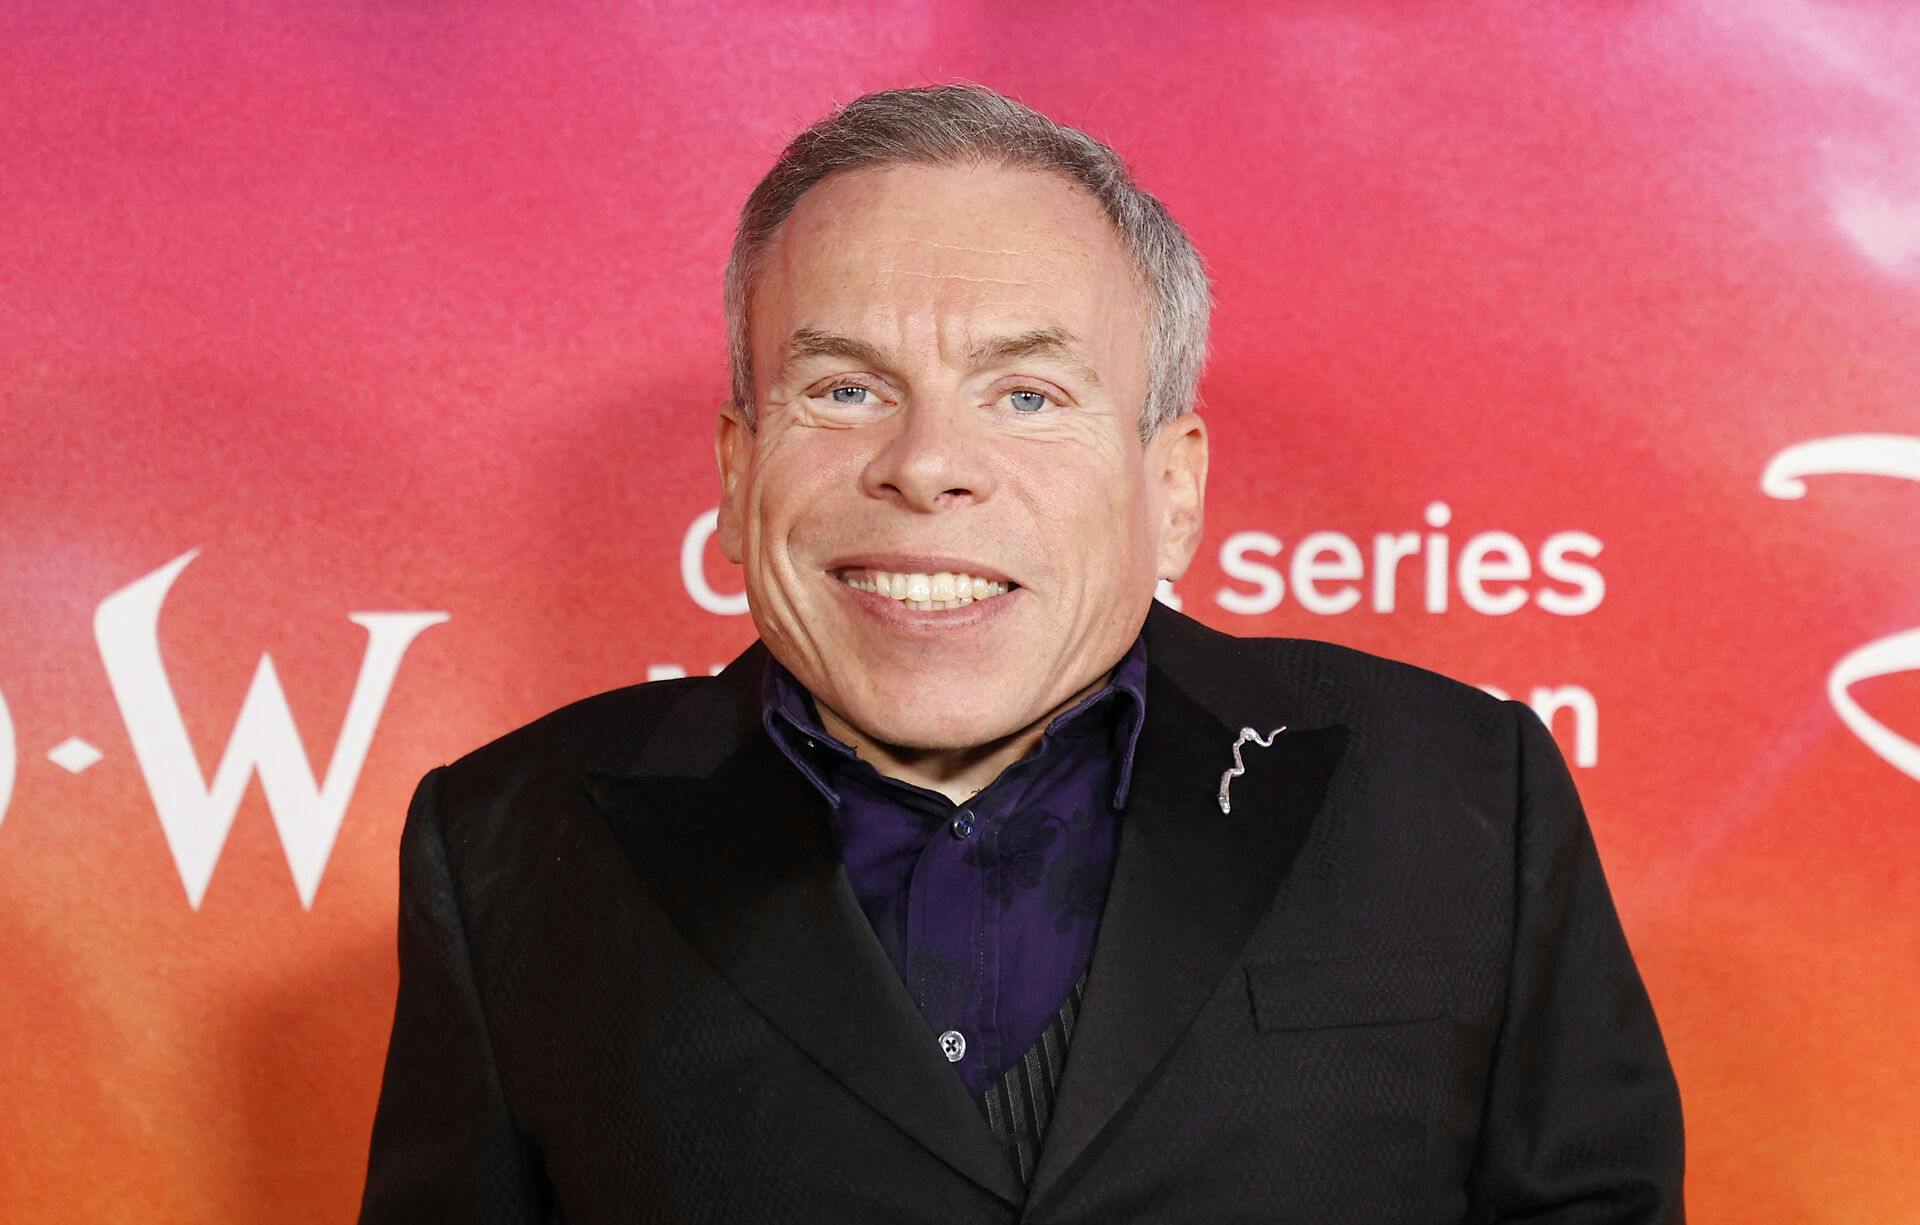 British actor Warwick Davis attends the premiere of Lucasfilm and Imagine Entertainment's new series "Willow" at the Regency Village Theatre in Westwood, California, on November 29, 2022. Michael Tran / AFP